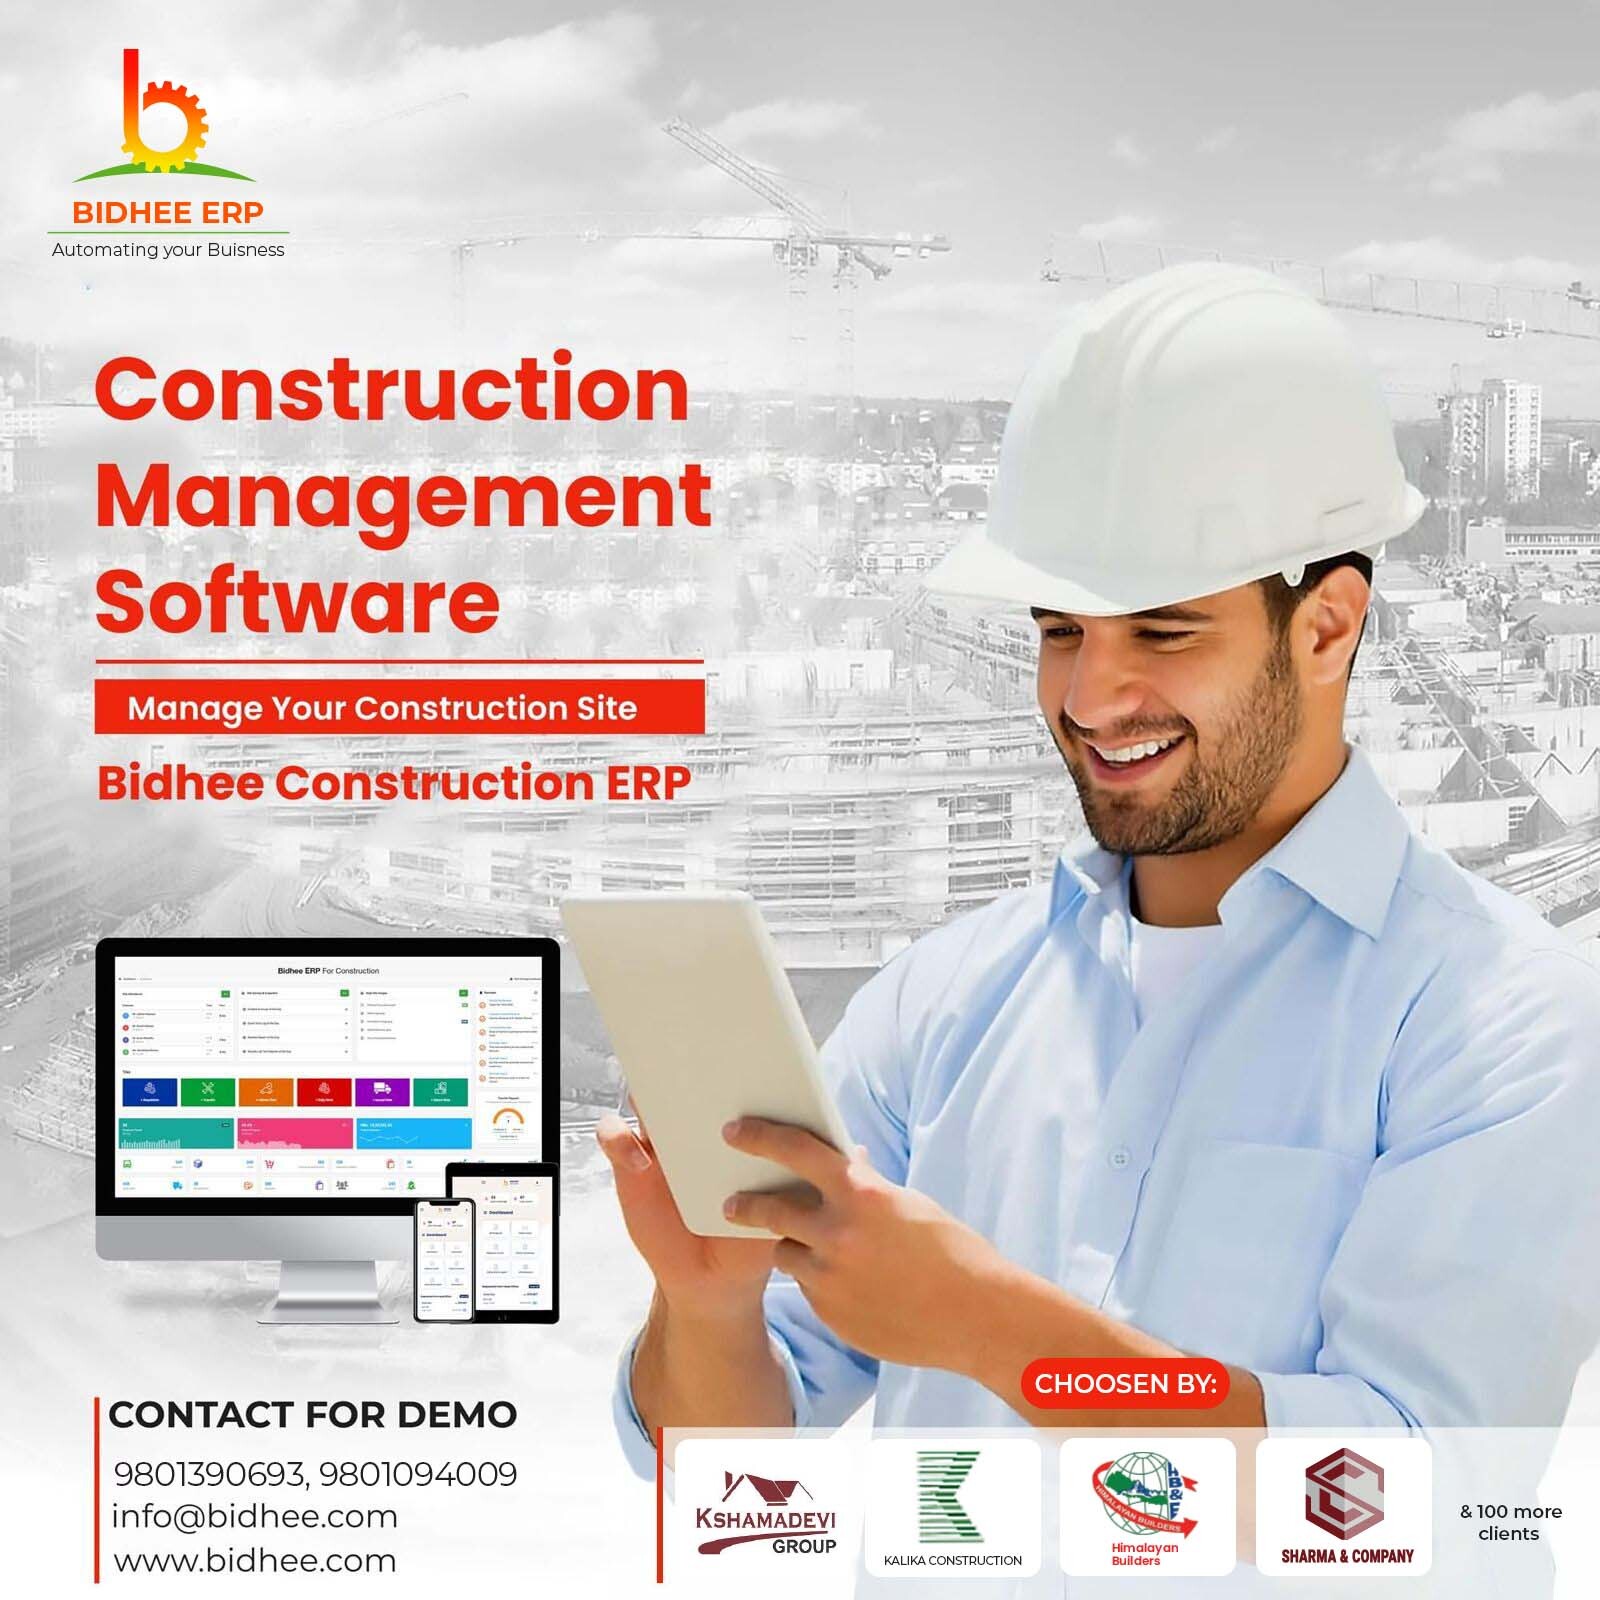 Transforming Construction Process with Bidhee ERP